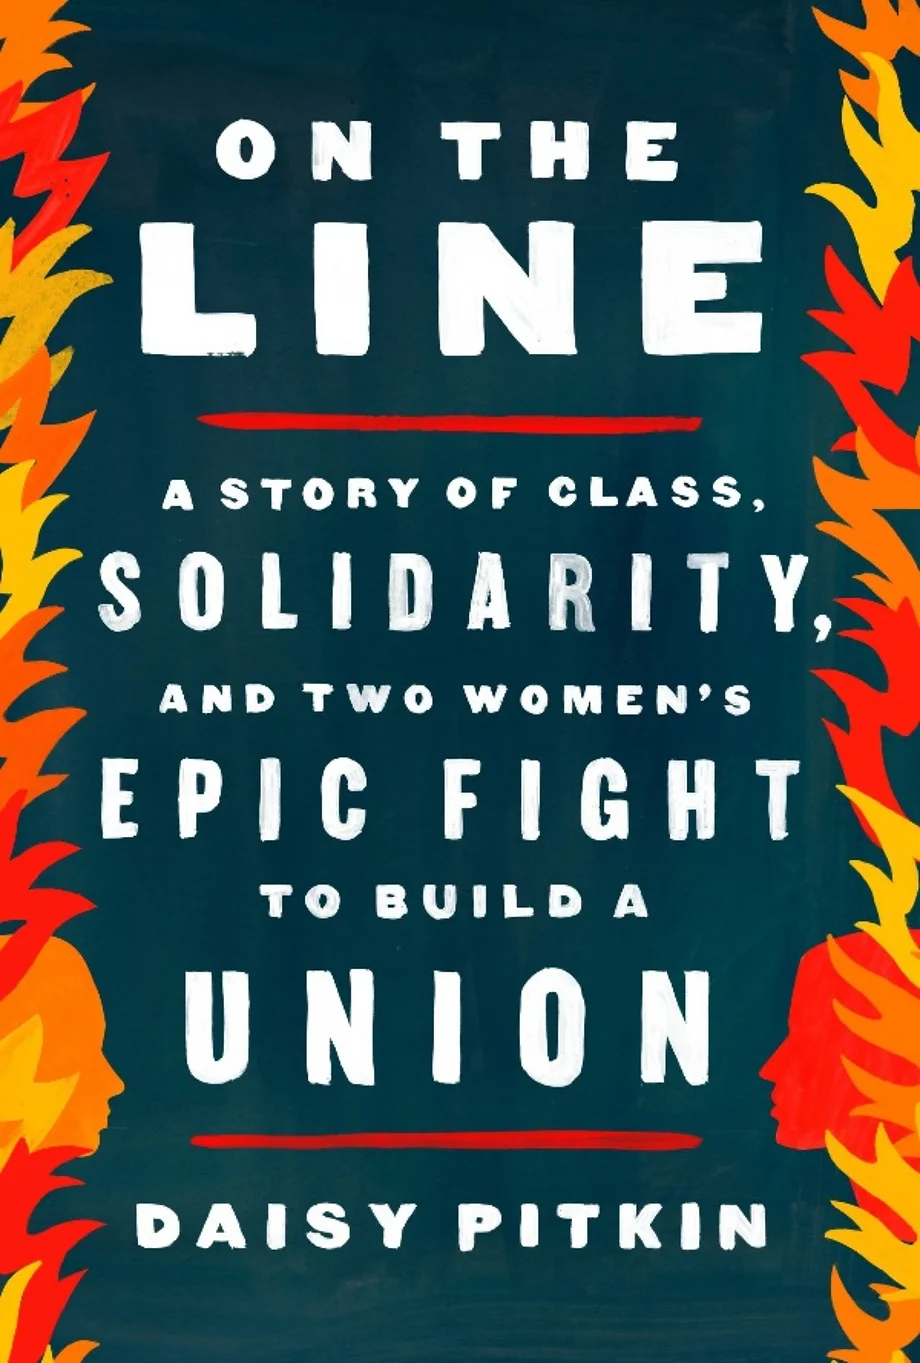 Cover of Daisy Pitkin's Book "On the Line"